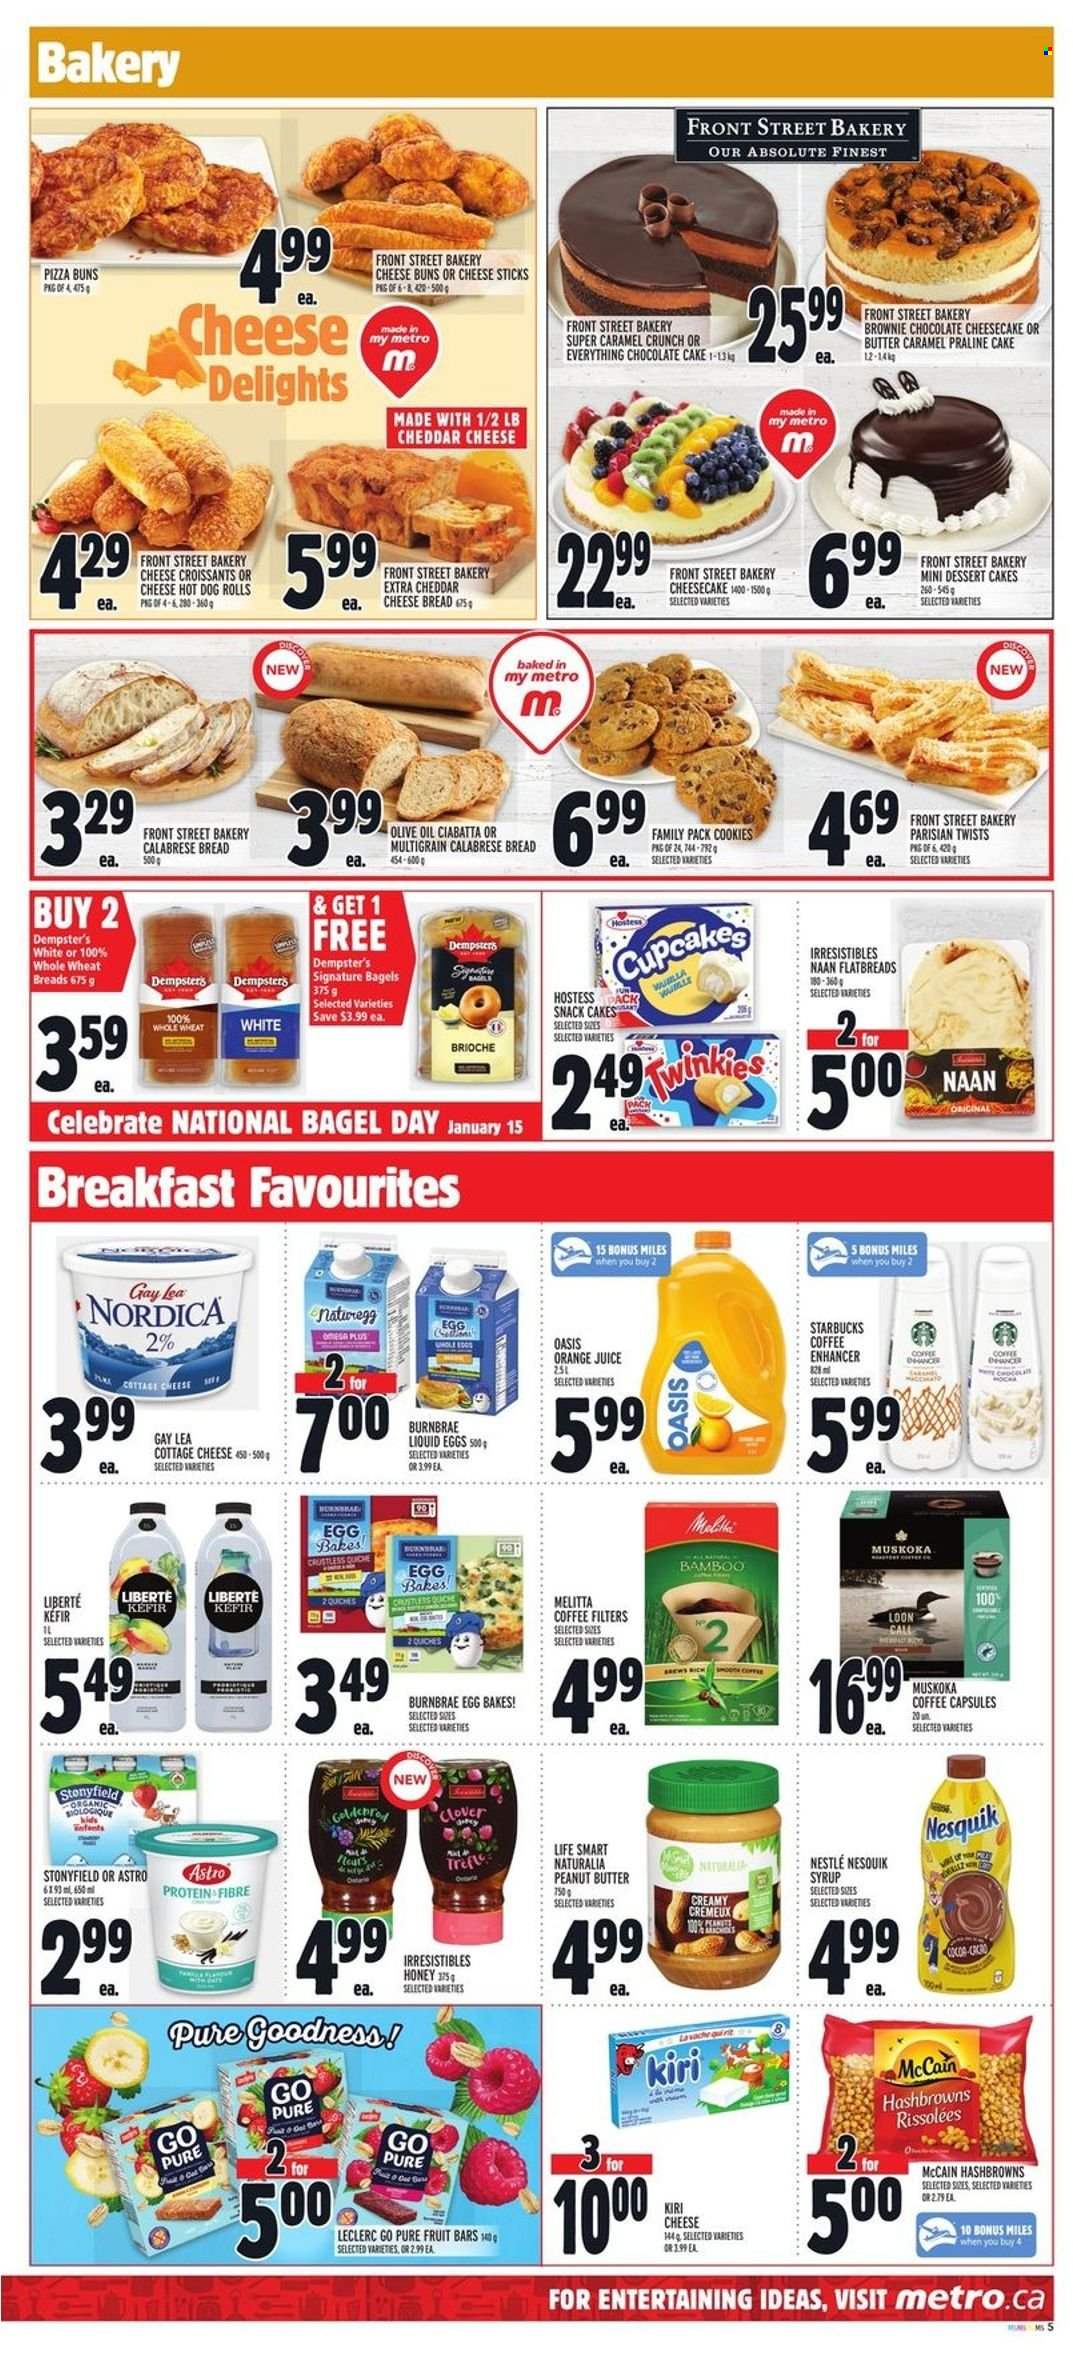 thumbnail - Metro Flyer - January 13, 2022 - January 19, 2022 - Sales products - bagels, bread, hot dog rolls, cake, buns, brioche, cupcake, cheesecake, brownies, chocolate cake, pizza, cottage cheese, cheddar, Kiri, Clover, kefir, eggs, cheese sticks, McCain, hash browns, cookies, chocolate, snack, caramel, olive oil, oil, honey, peanut butter, syrup, orange juice, juice, coffee, coffee capsules, Starbucks, Absolute, Nesquik, Nestlé, ciabatta. Page 6.